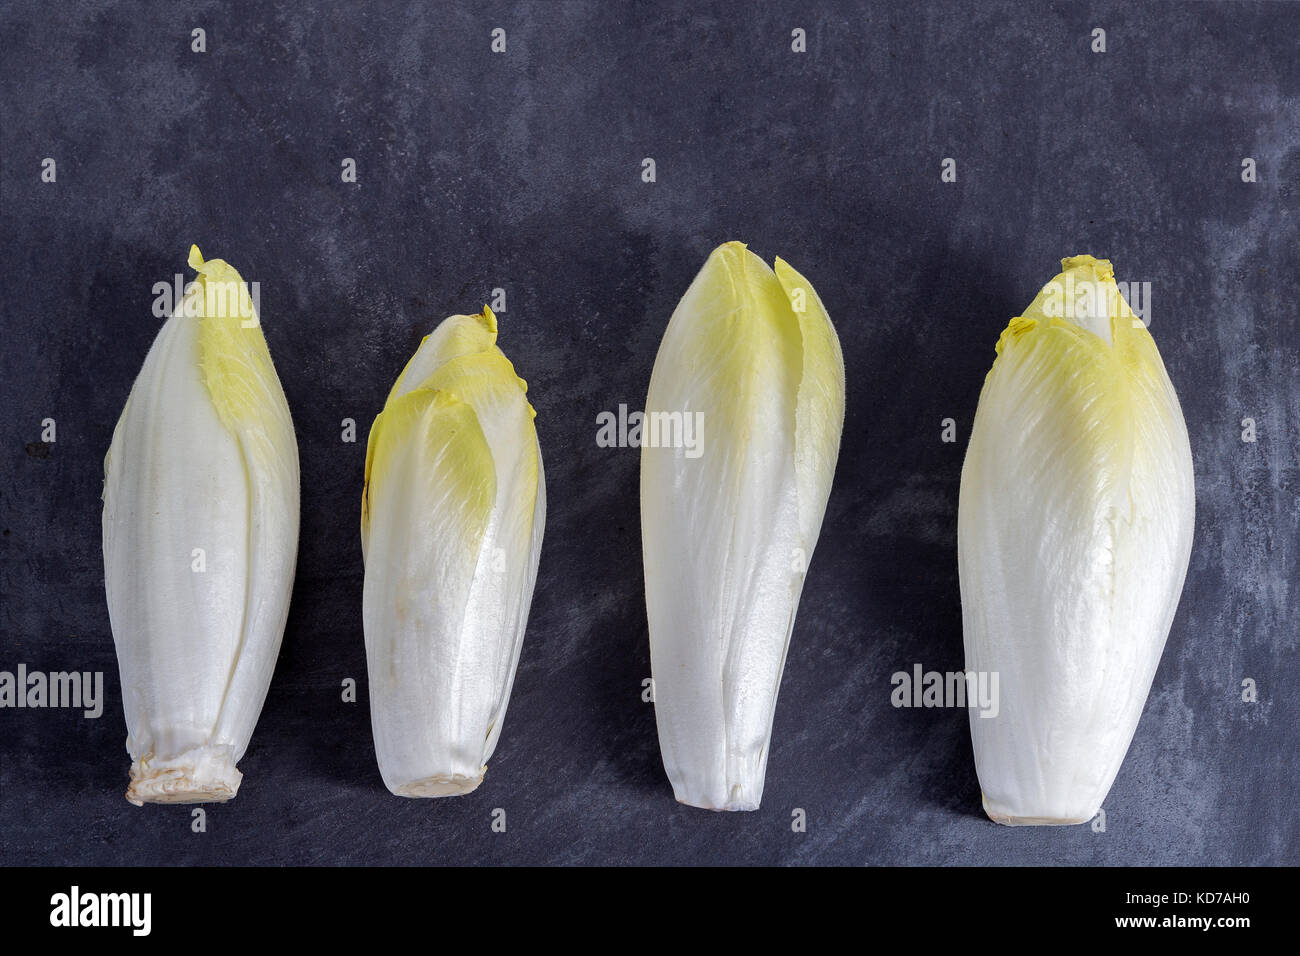 Endive Cichorium endivia with beautiful soft green leaves,aligned on slate table. Stock Photo